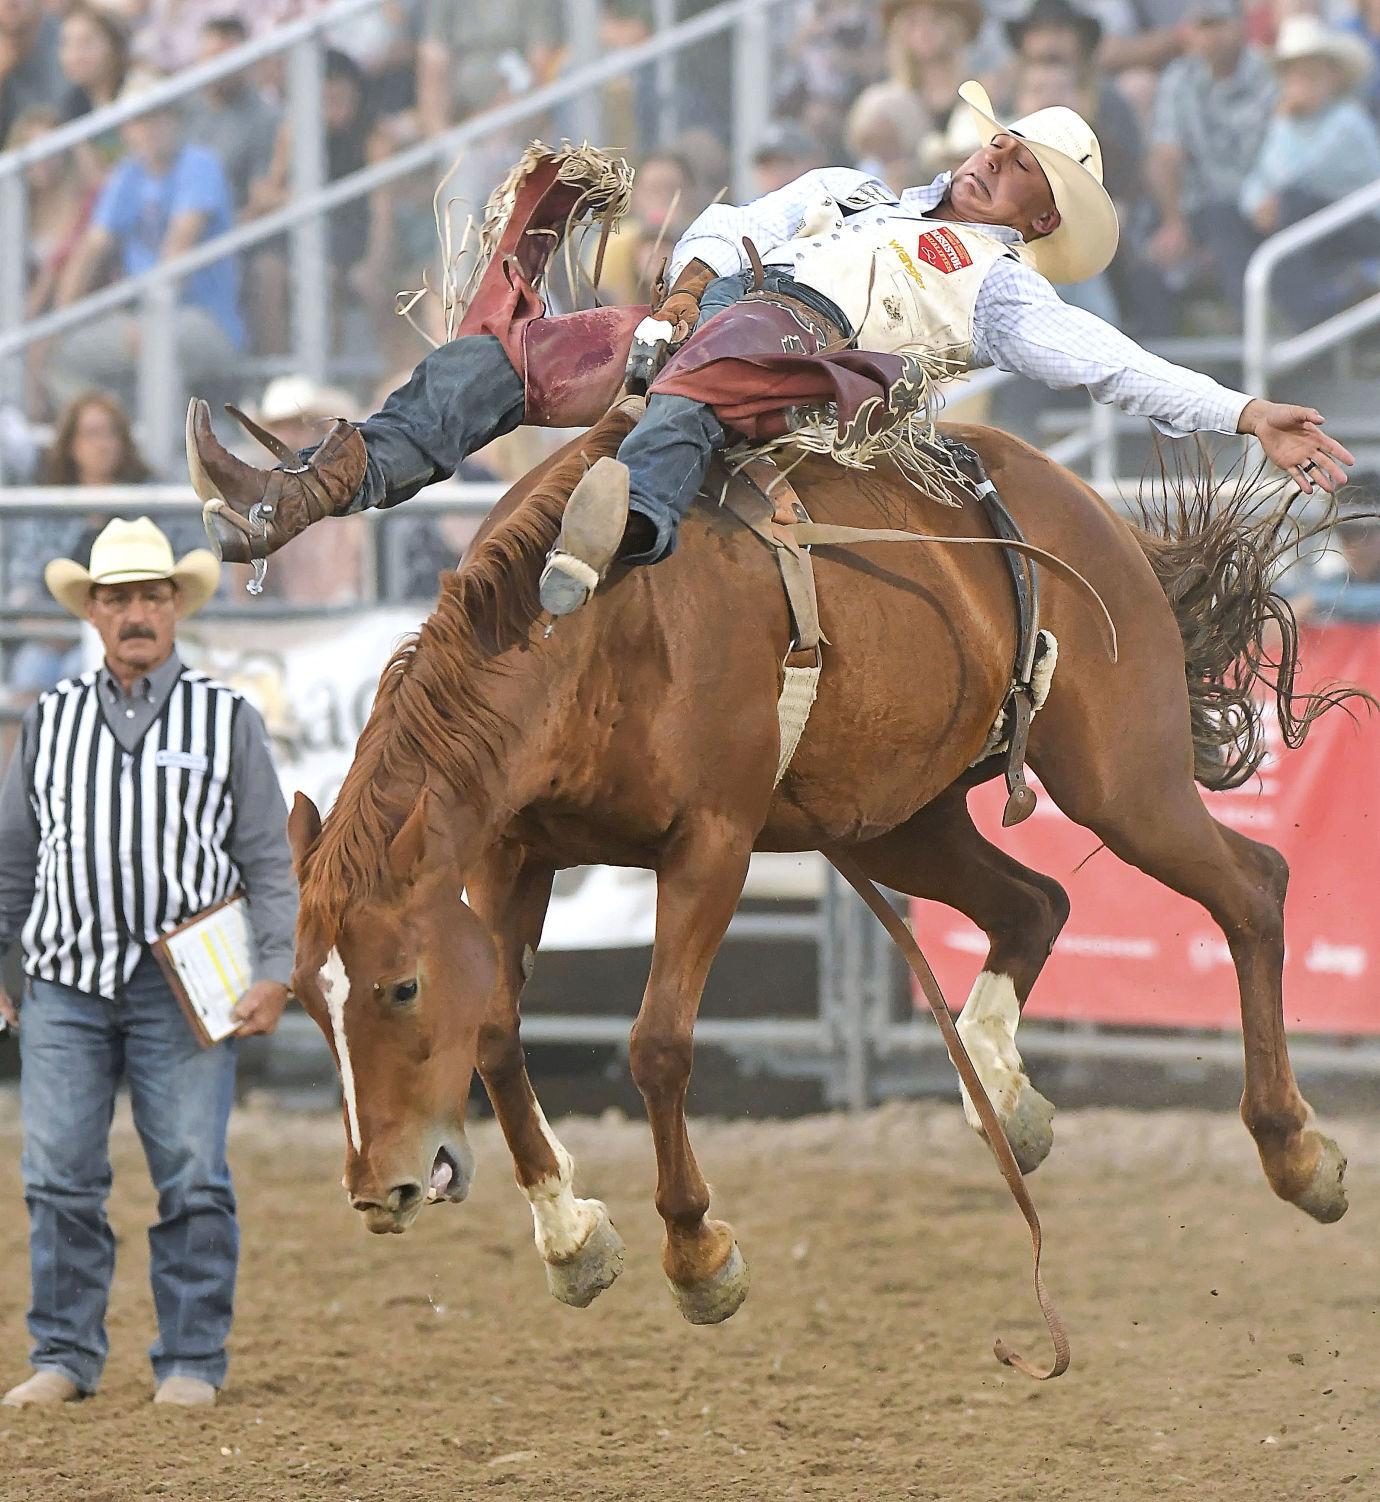 Many top cowboys make stop at local rodeo Local Sports hjnews image